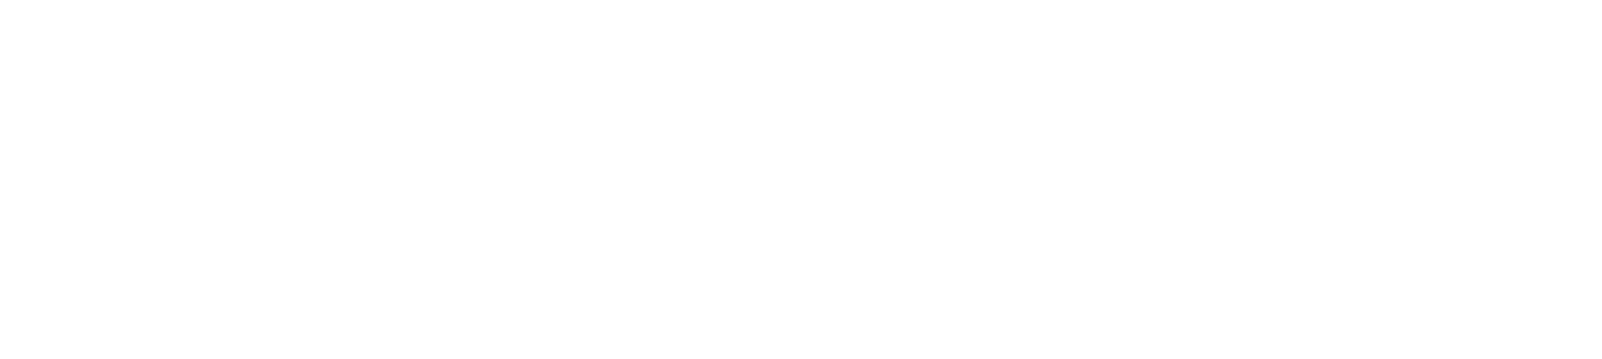 UNISON SQUARE GARDEN LIVE Blu-ray / DVD UNISON SQUARE GARDEN TOUR 2018 MODE MOOD MODE at Omiya Sonic City 2018.06.29 2018.12.26 In Stores